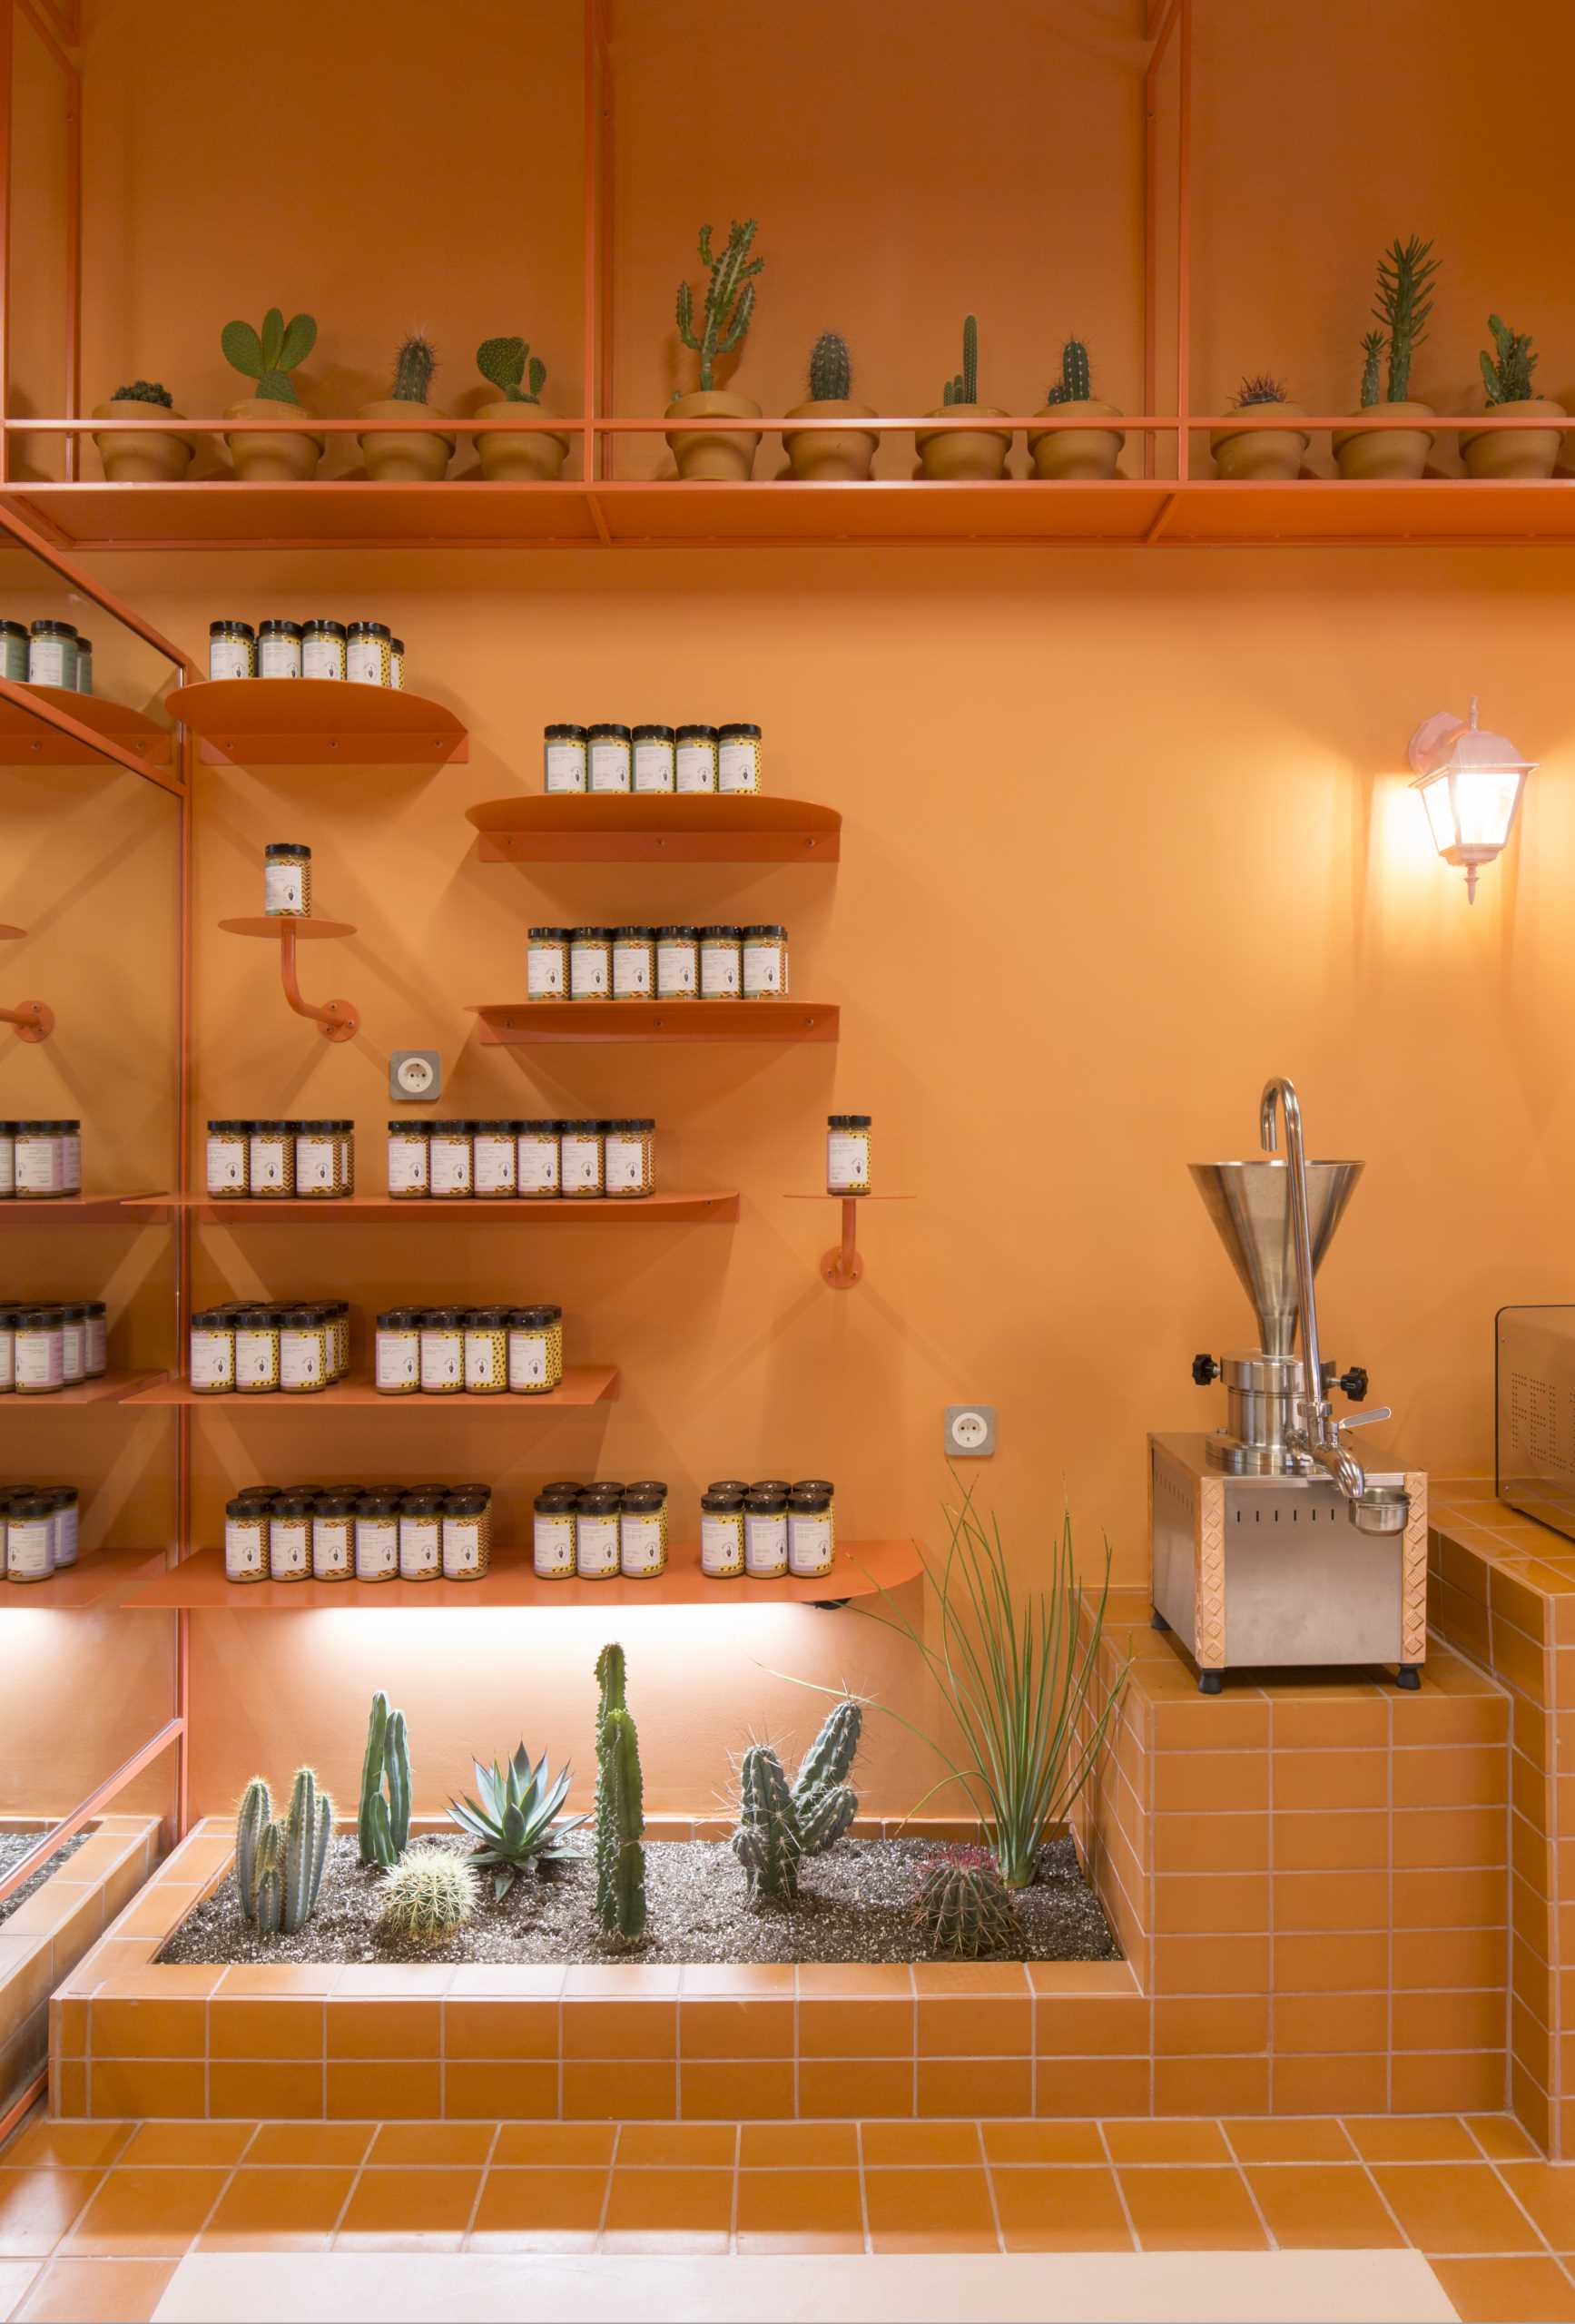 A modern retail store with a monochromatic terracotta interior that also includes built-in planters for cacti.